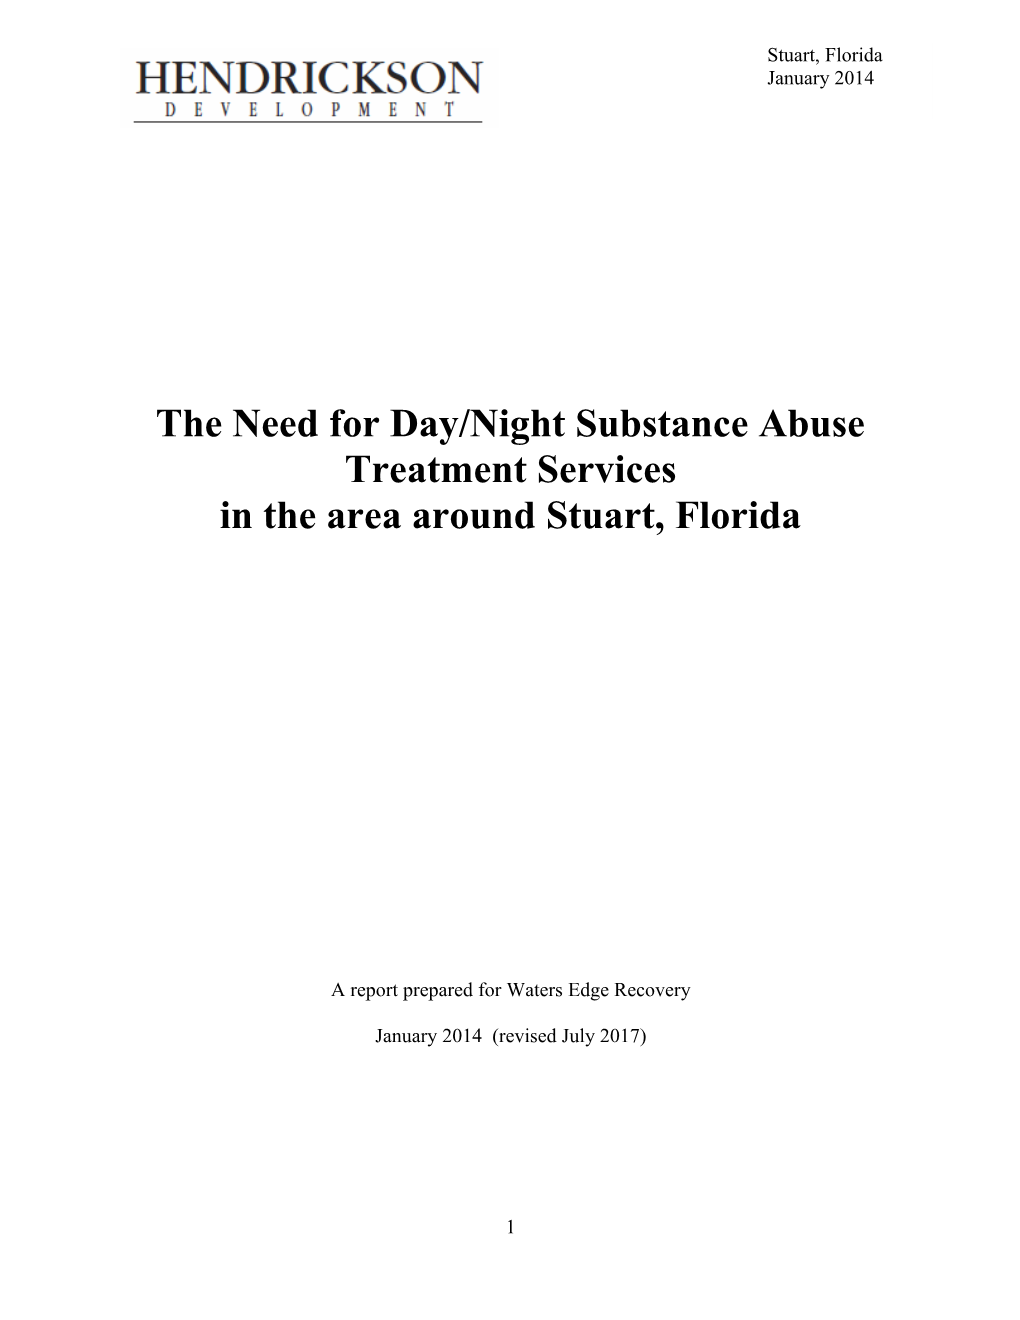 The Need for Day/Night Substance Abuse Treatment Services